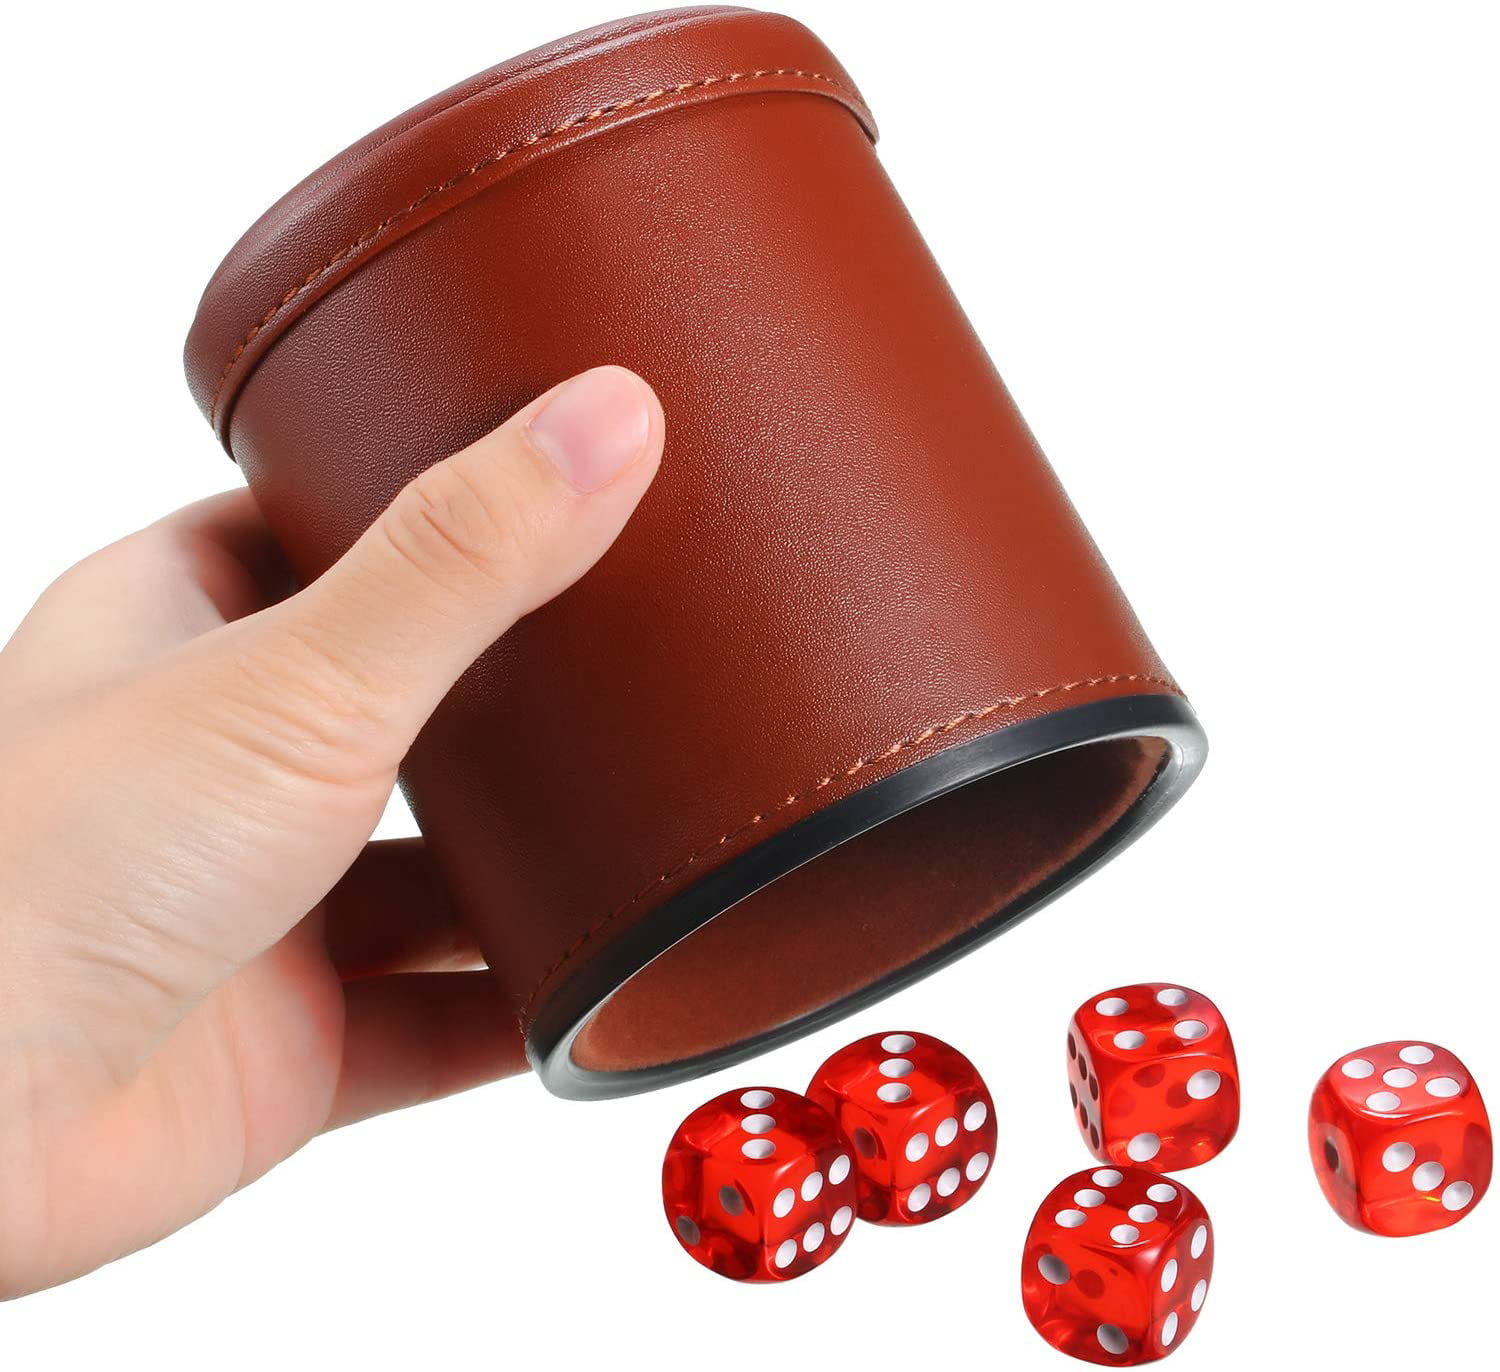 PU Leatherette Dice Rolling Cup Set 4 Pieces PU Leather Dice Cups Red Felt Lining Quiet Shaker with 20 Dices for Craps Farkle Game Kill Time Pressure